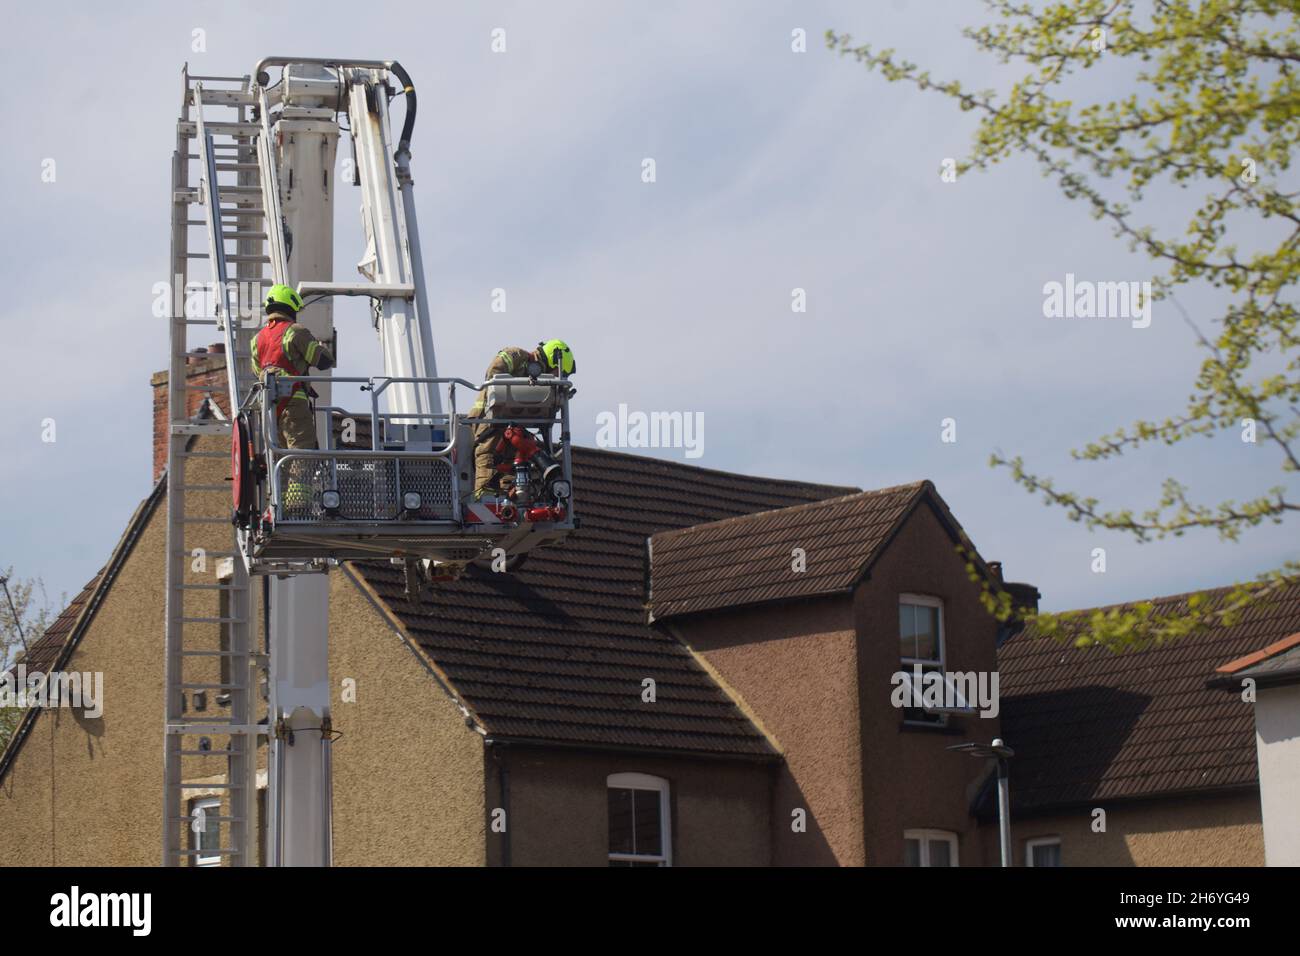 Firefighters on ladder Stock Photo